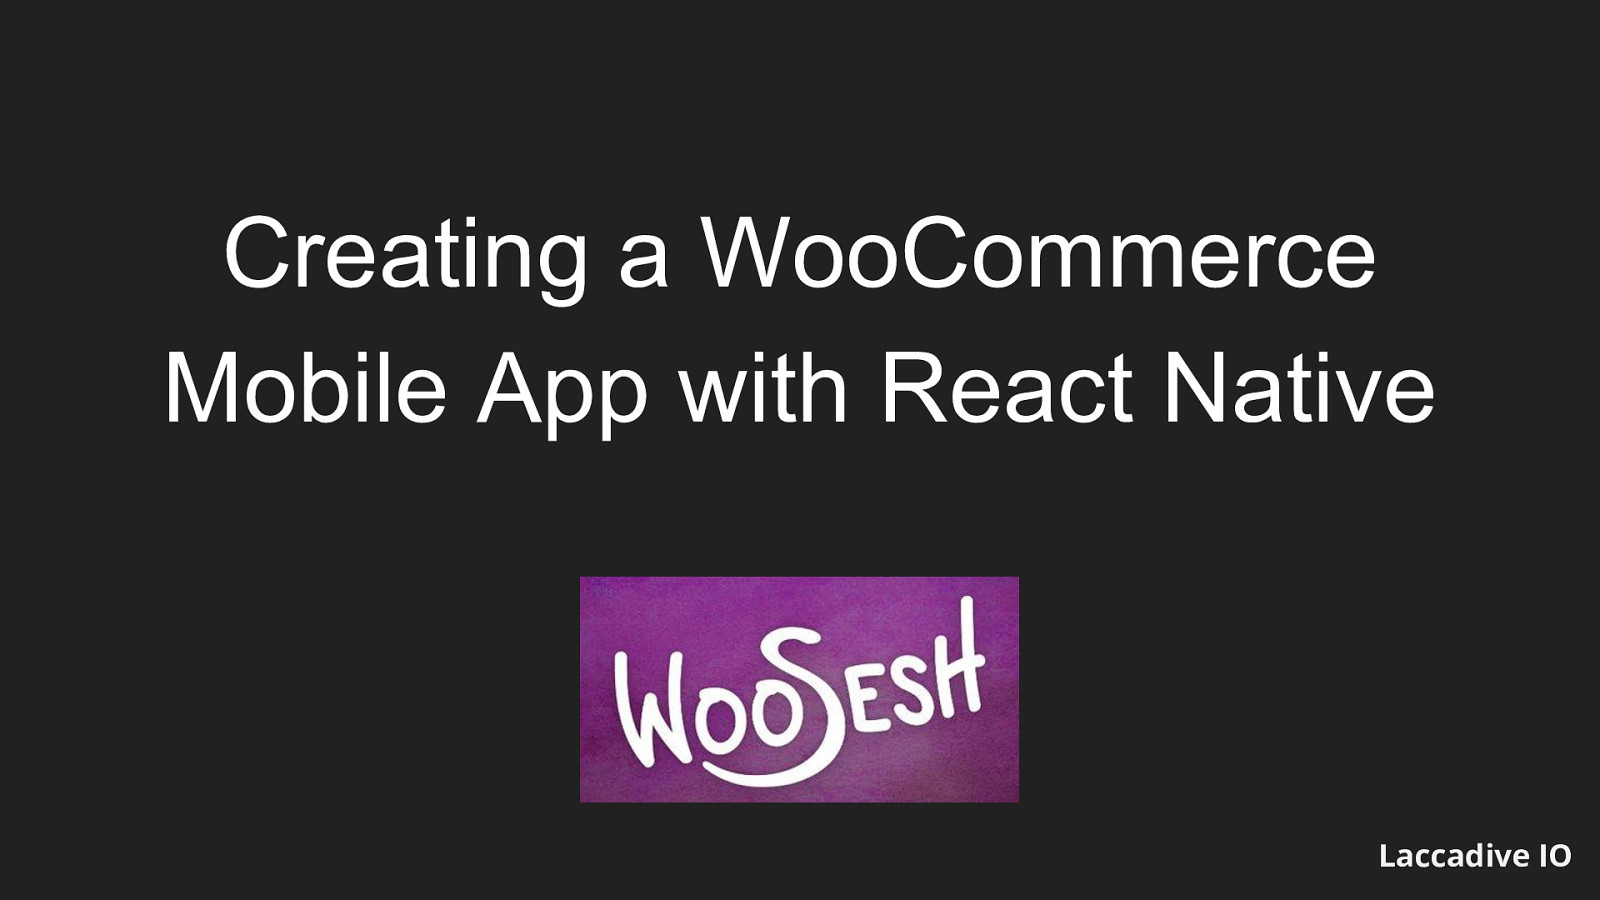 Creating a WooCommerce Mobile App with React Native